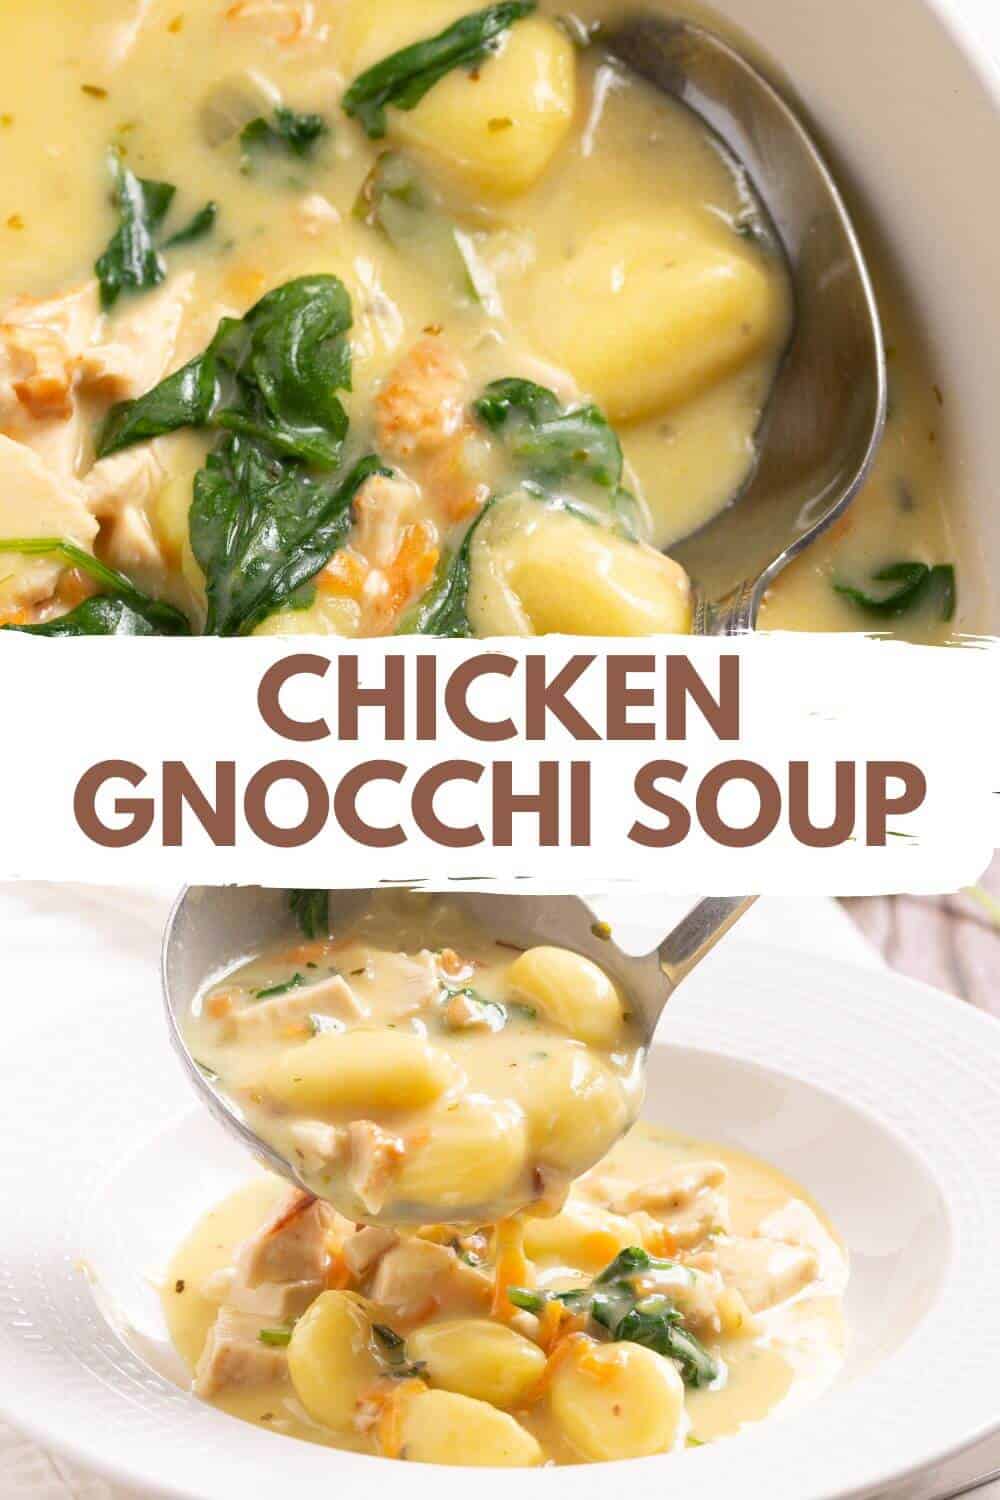 Chicken gnocchi soup recipe image with title text overlay.